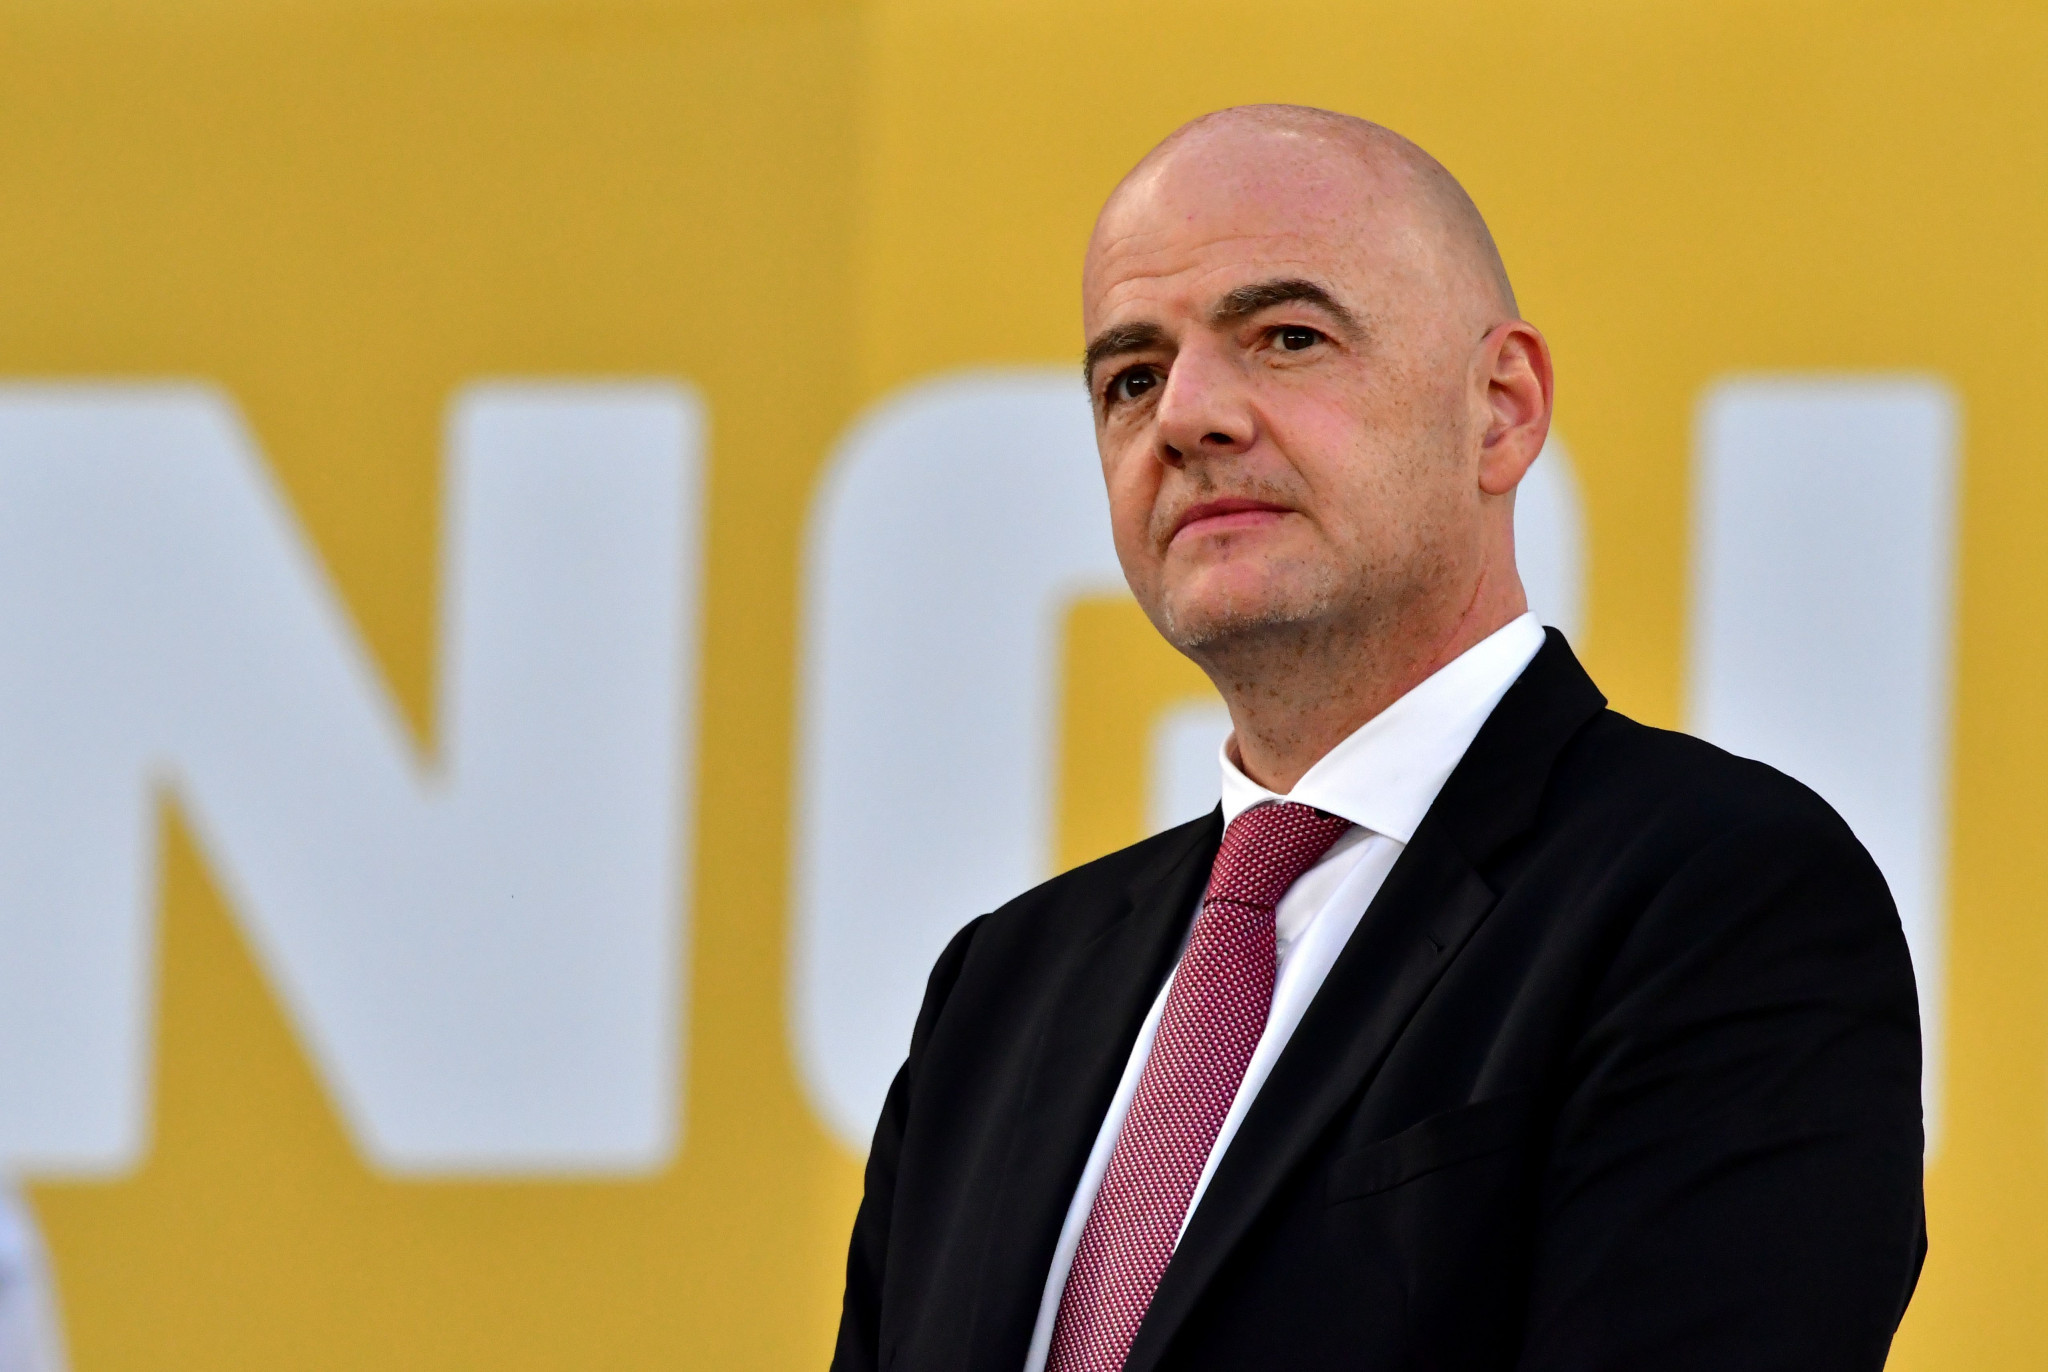 Gianni Infantino is set to be re-elected for a second term as FIFA President ©Getty Images